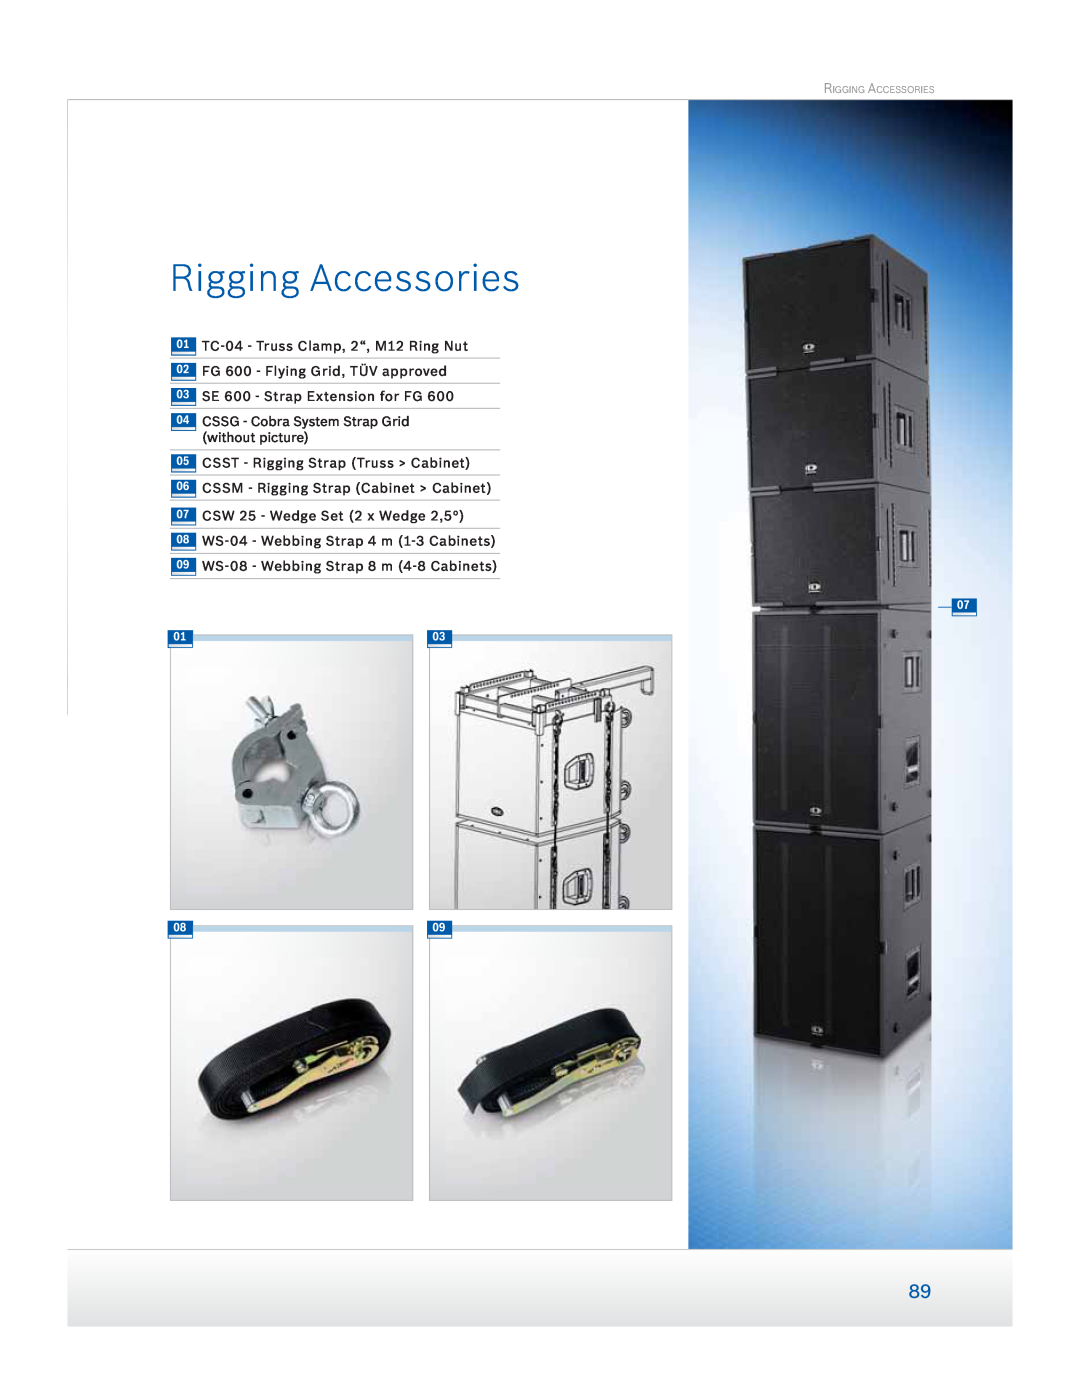 Dynacord Speaker manual Rigging Accessories, 01TC- 04 - Truss Clamp, 2“, M12 Ring Nut, 02FG 600 - Flying Grid, TÜV approved 